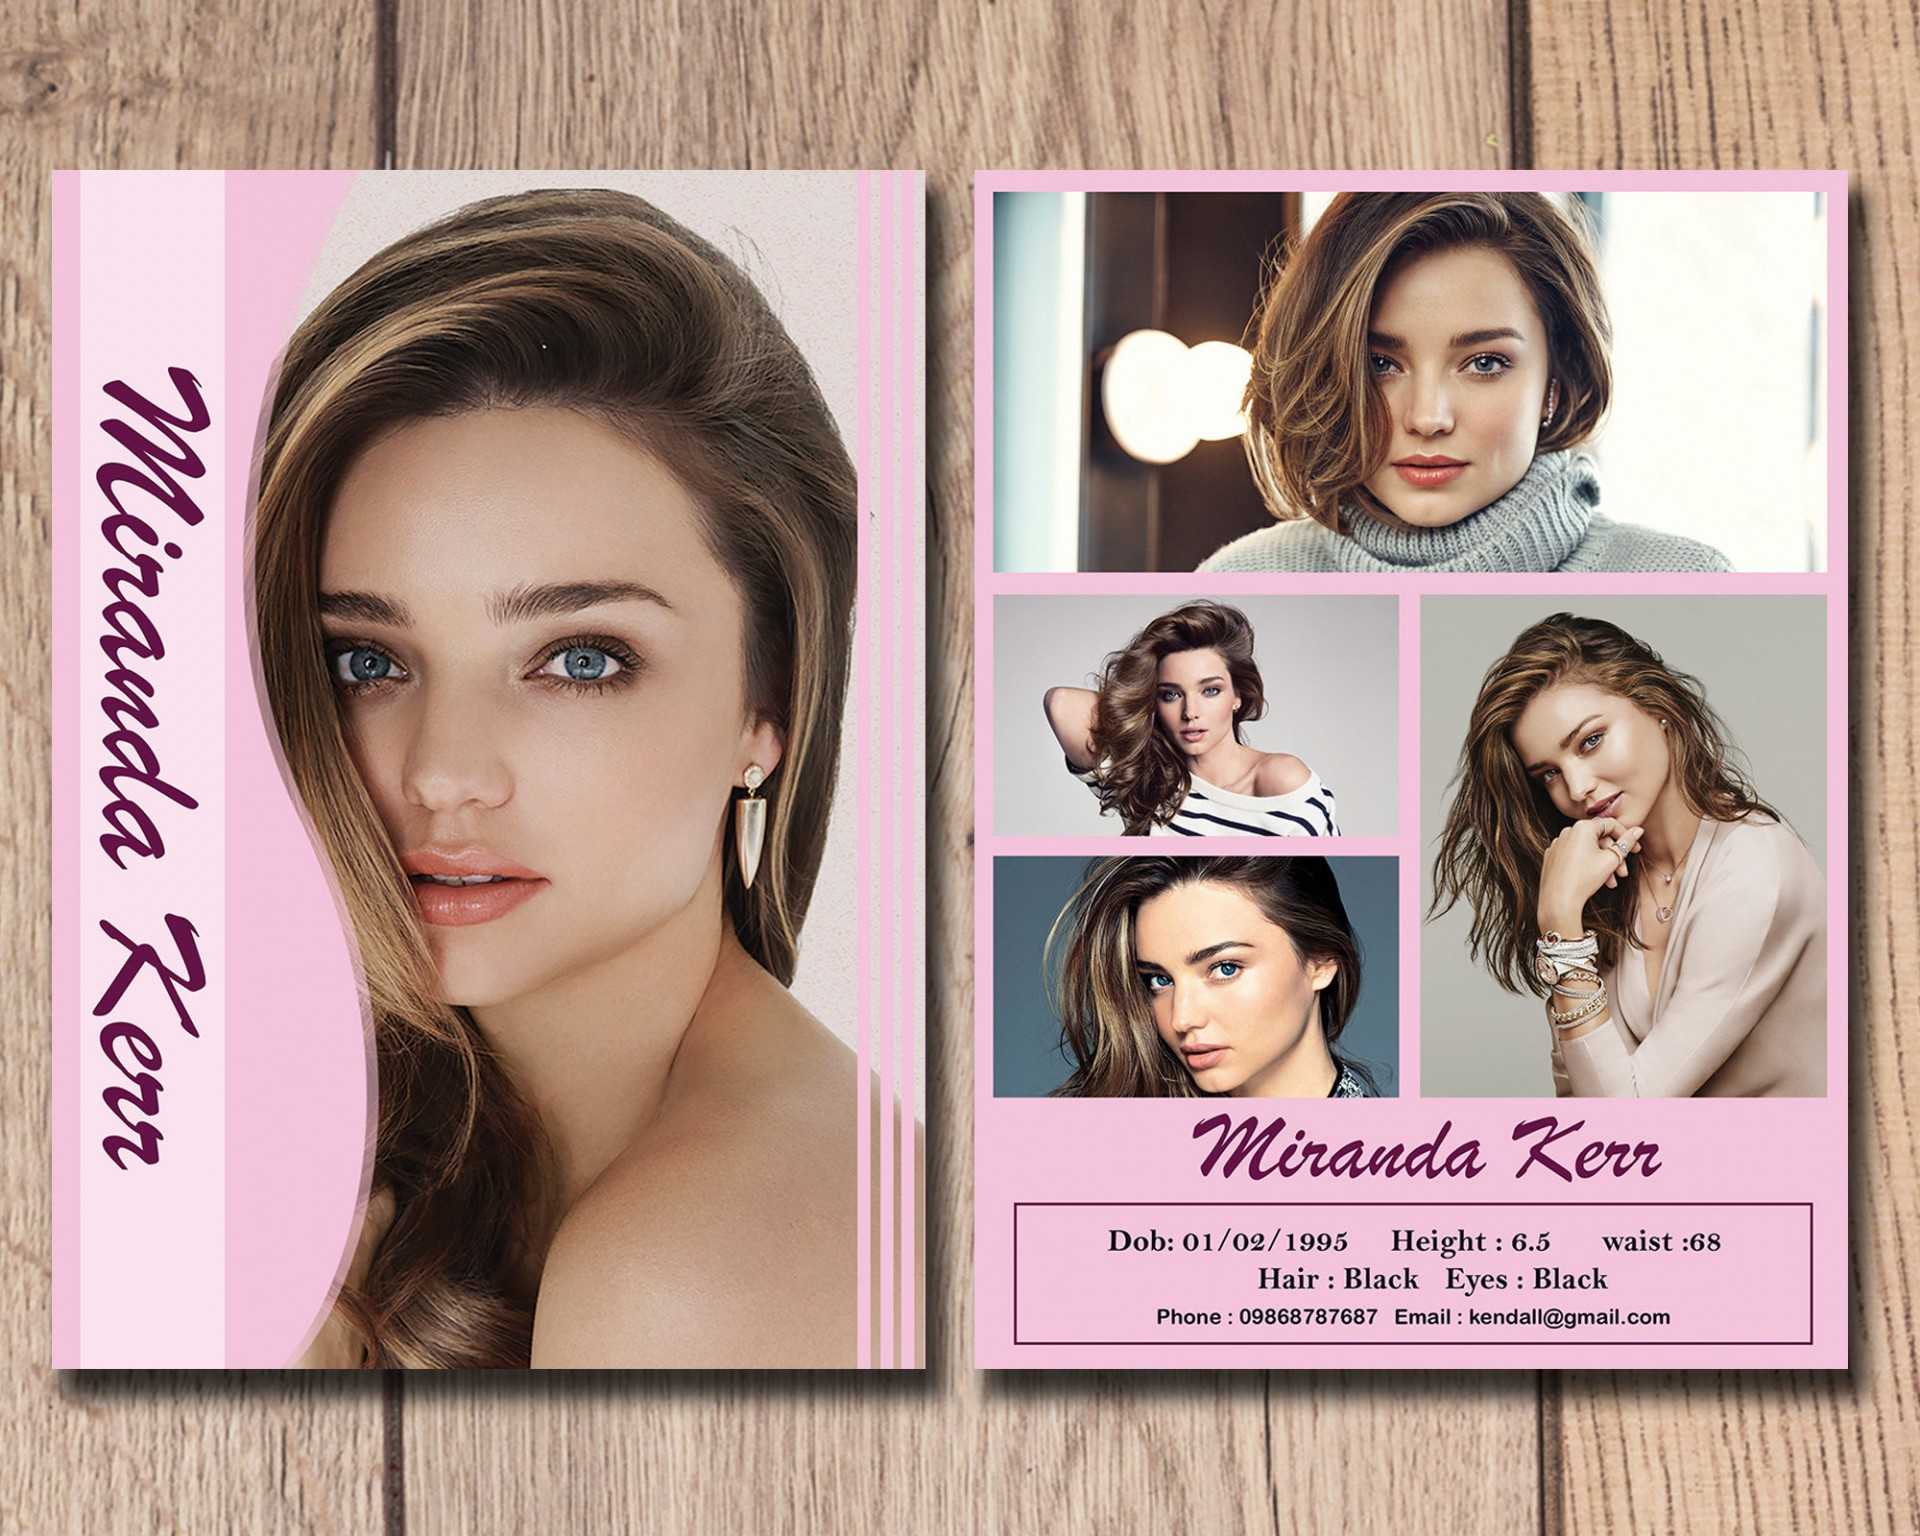 028 Model Comp Card Template Ideas Outstanding Free Pertaining To Model Comp Card Template Free